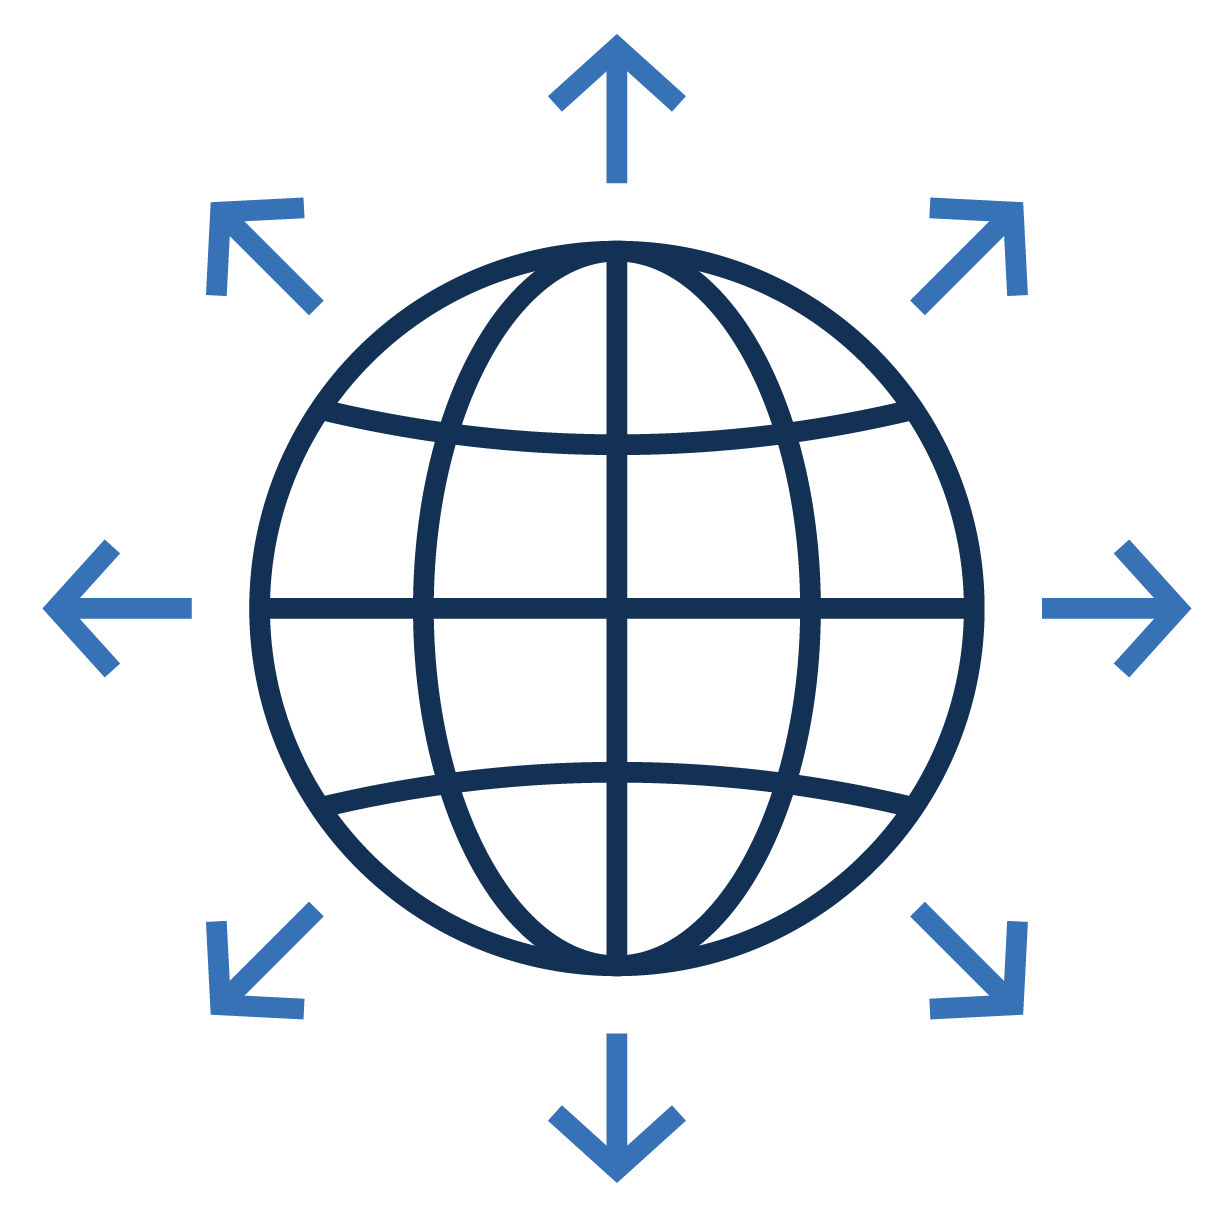 A icon representing access to a wide array of egress nodes for network routing.